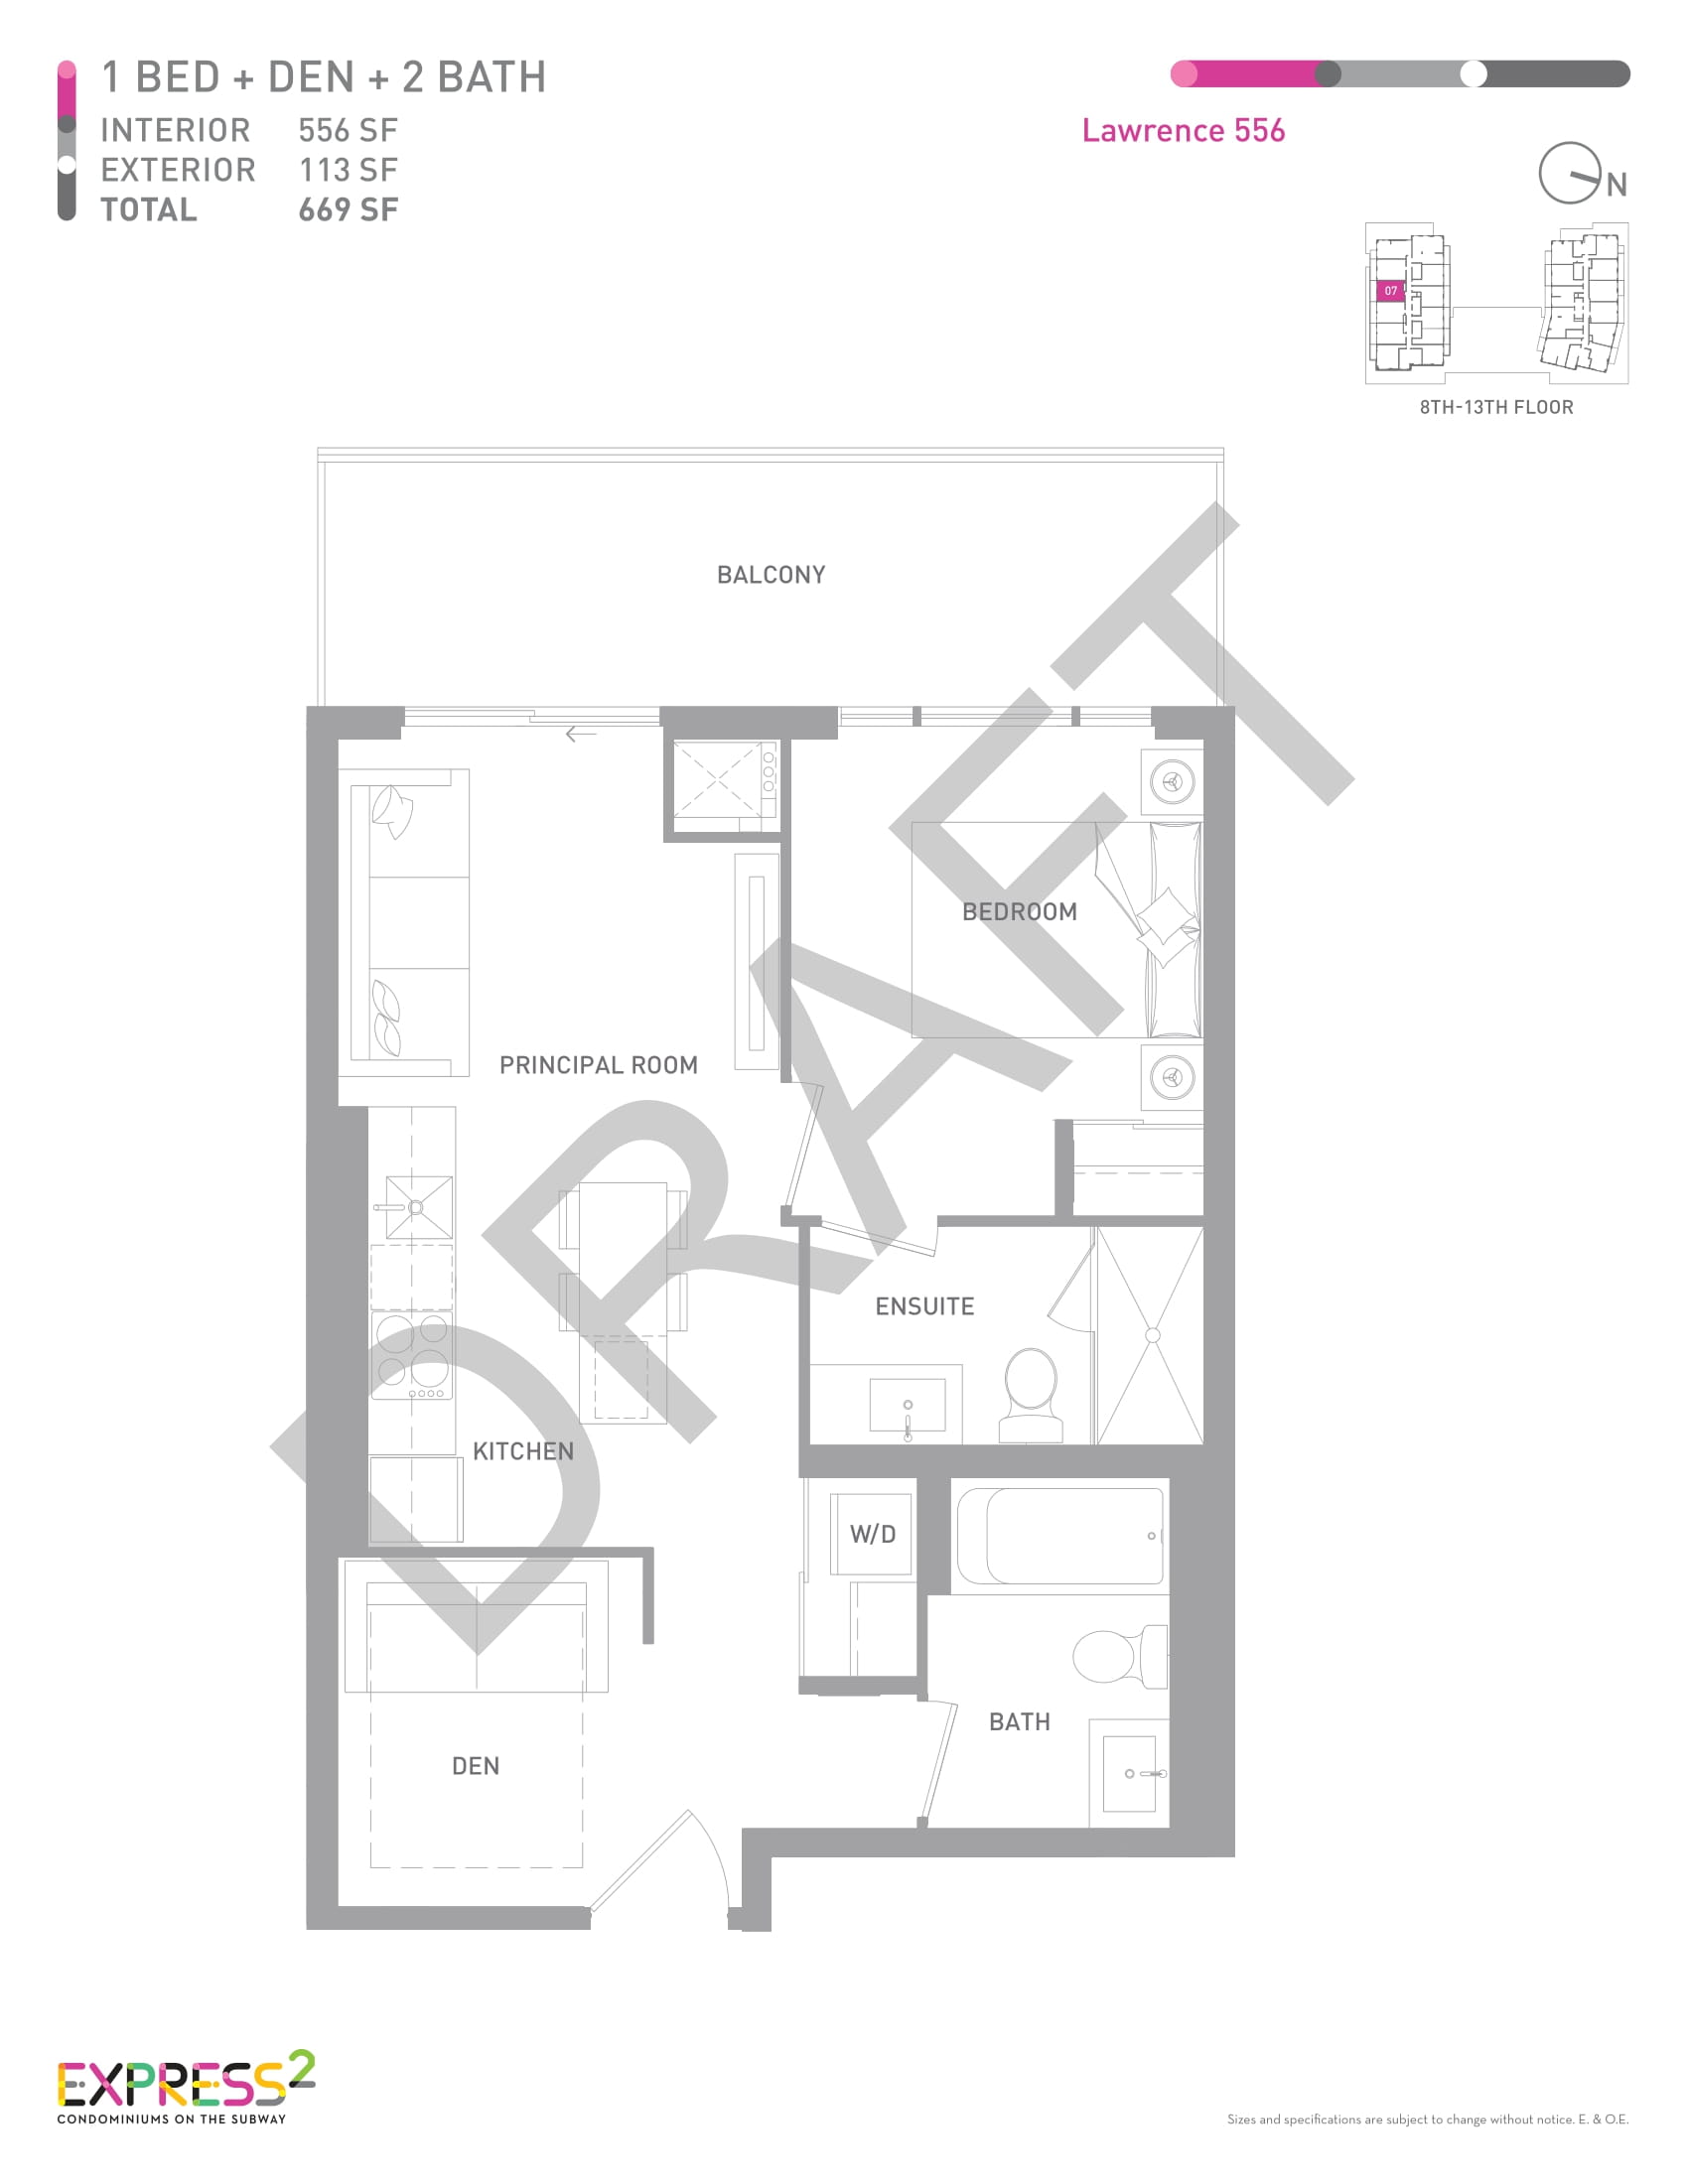 Express 2 Preview Floor Plans-05